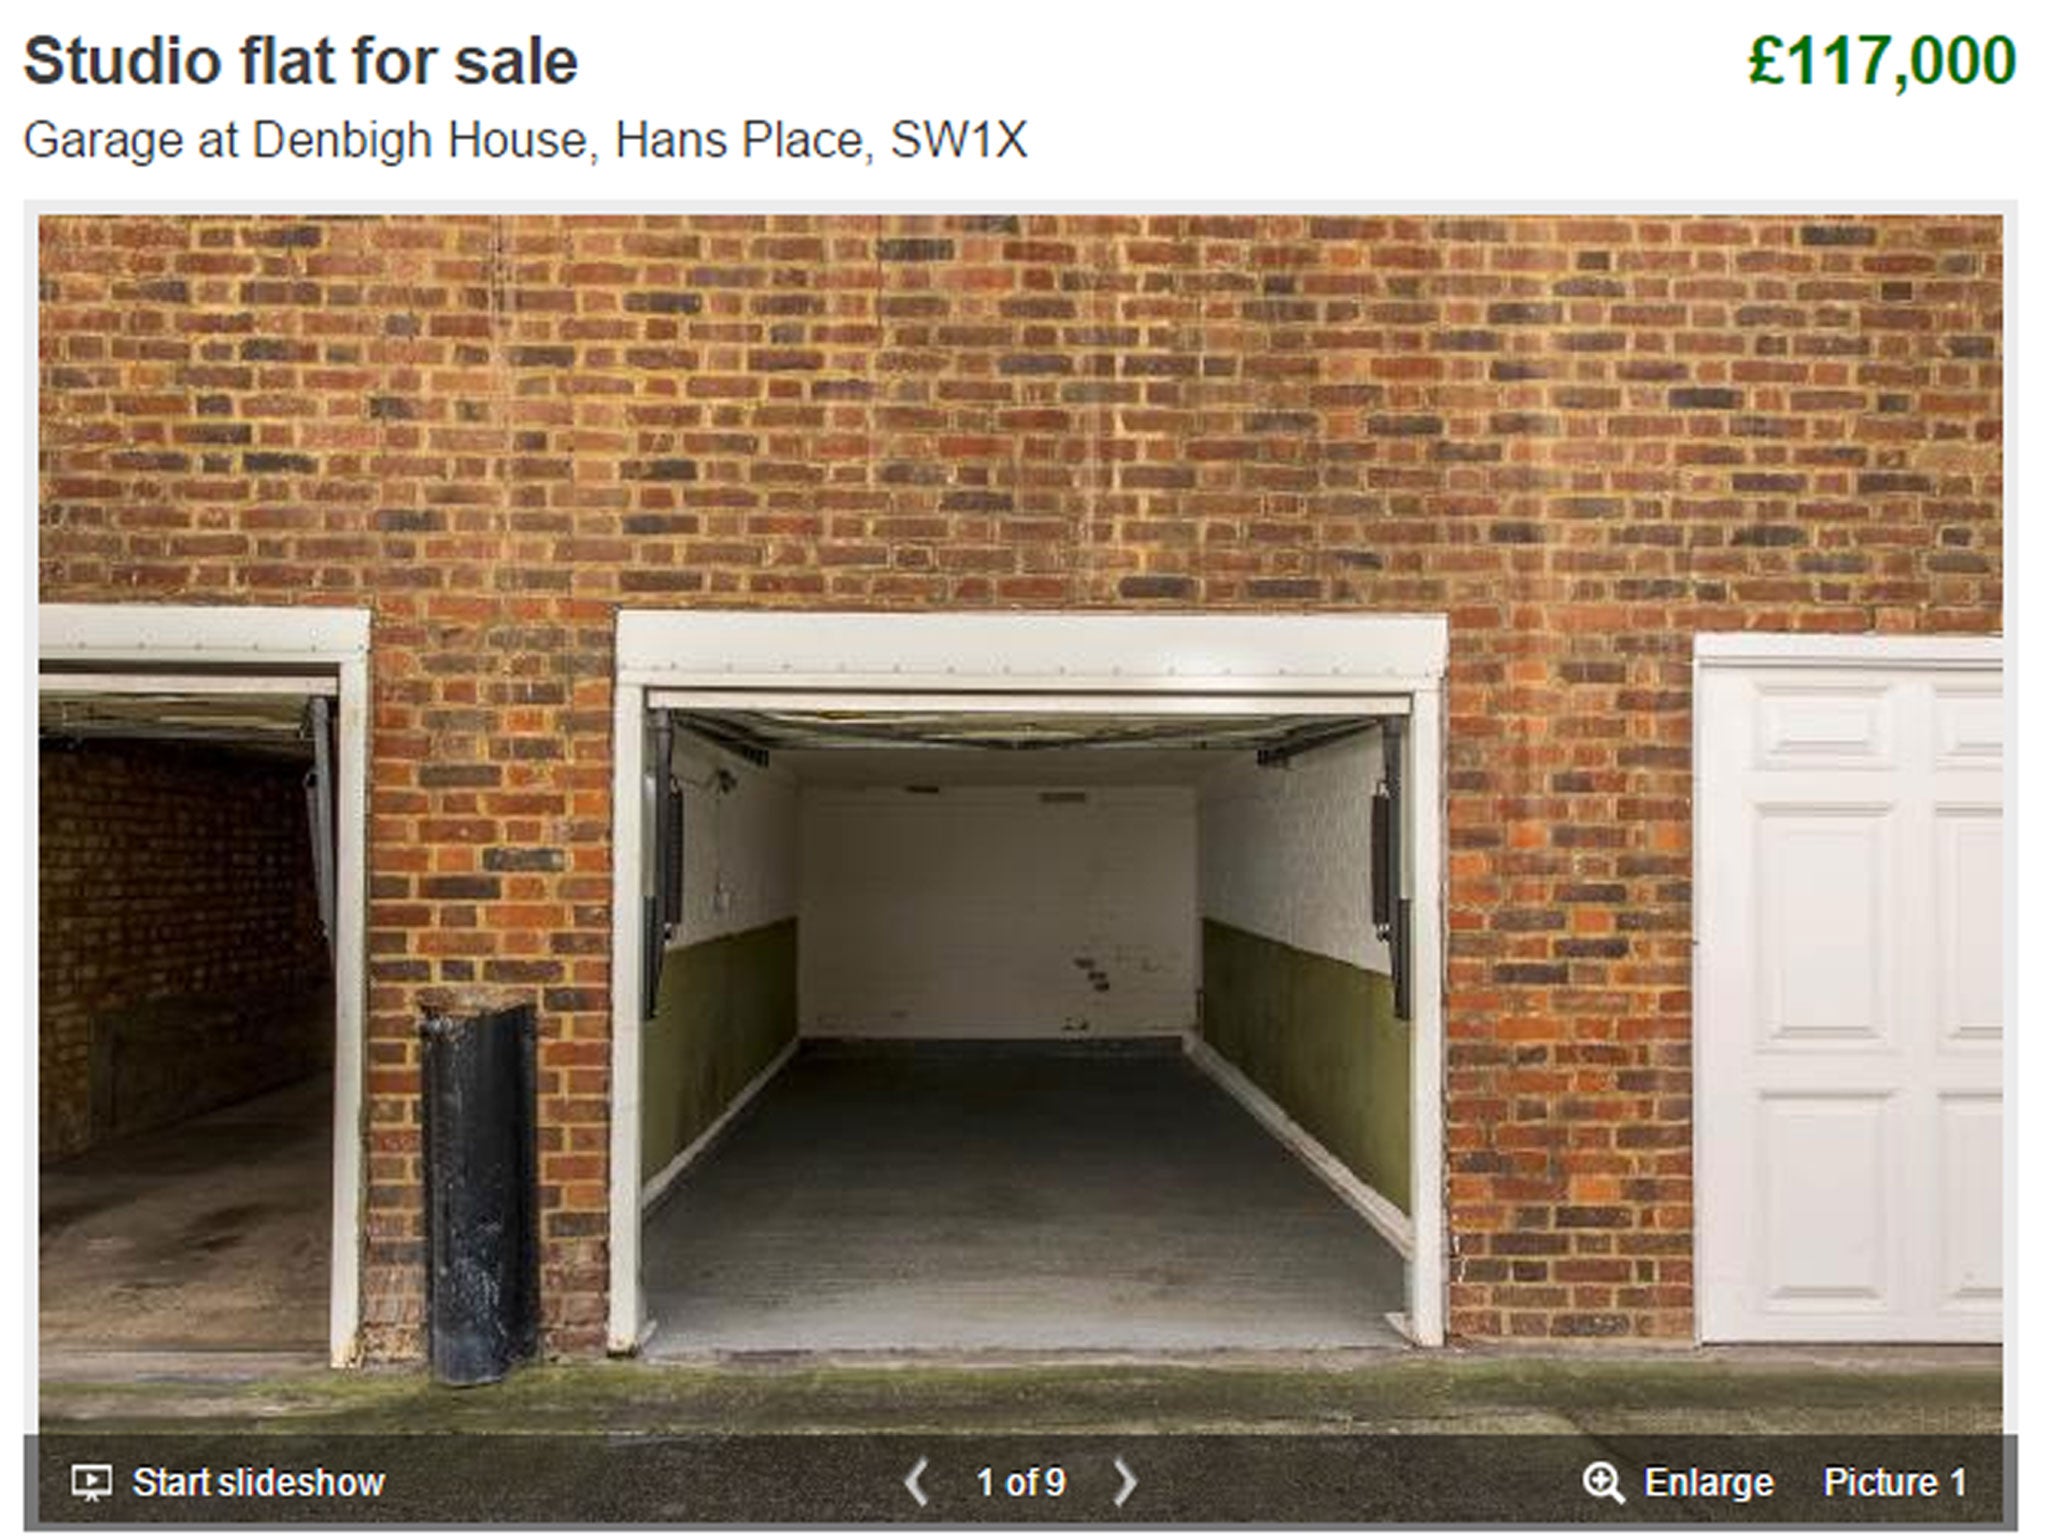 Douglas & Gordon has apologised for the error that saw the garage listed as a studio flat on Rightmove